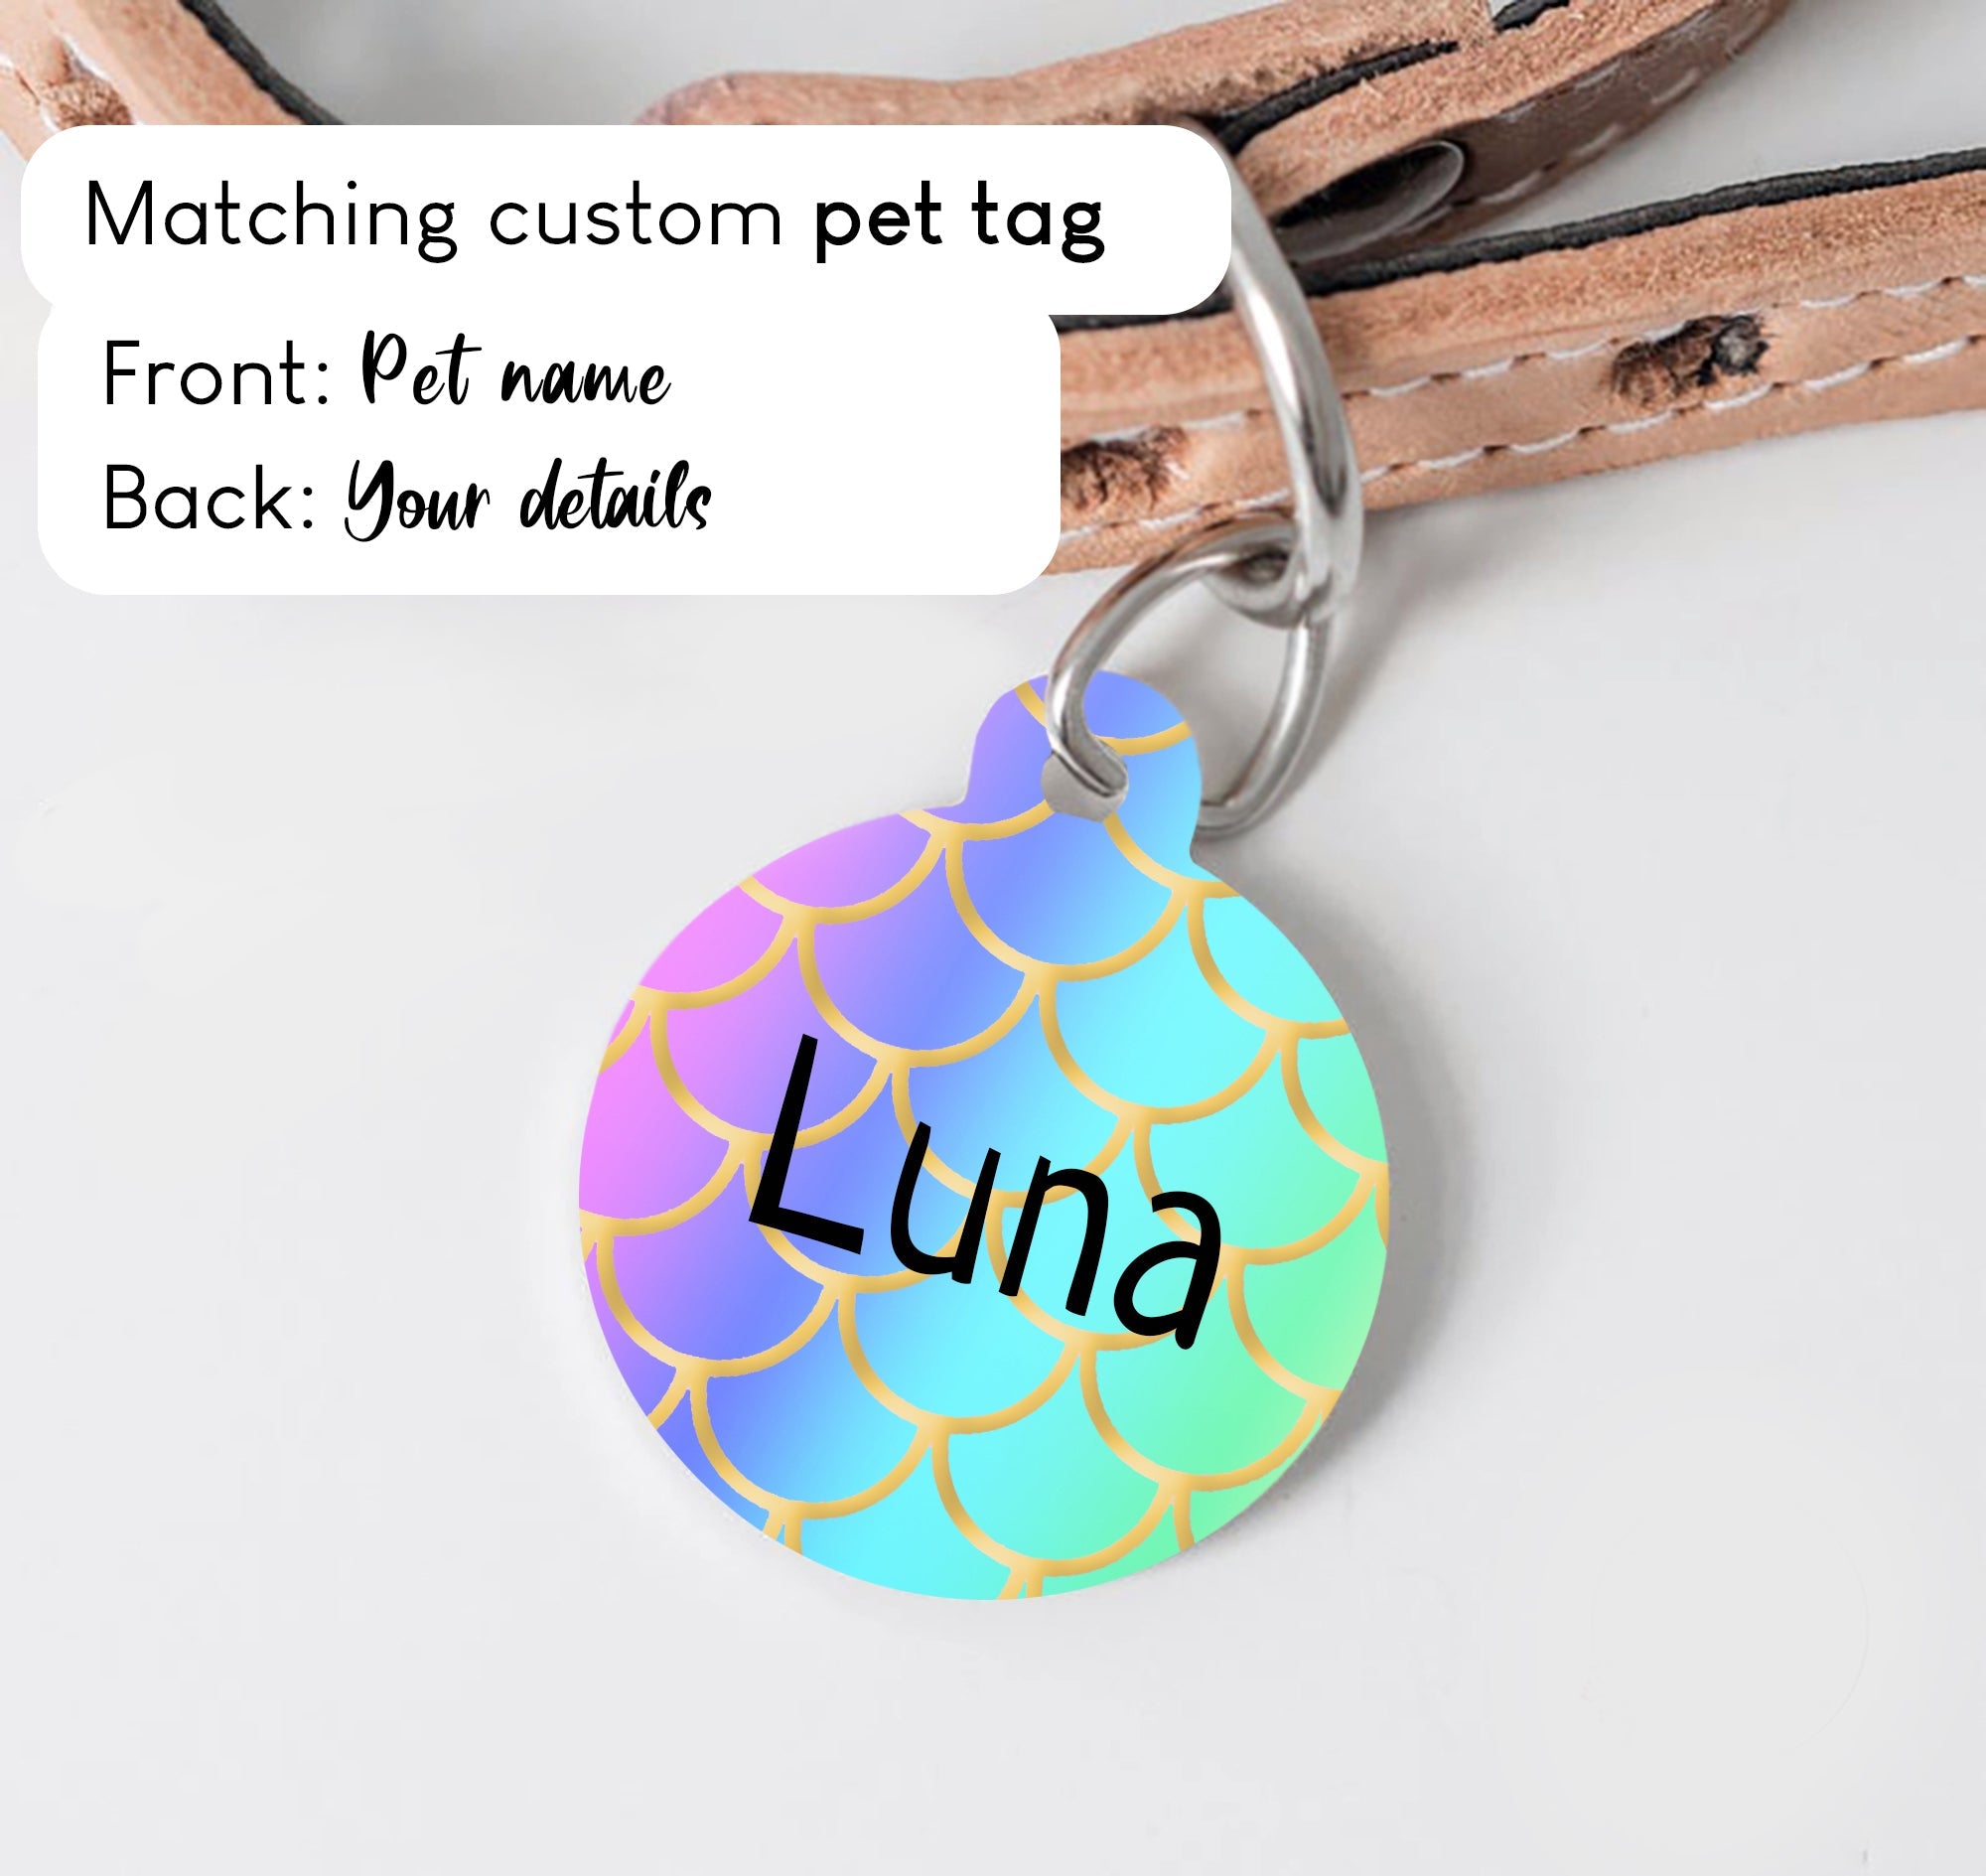 Rainbow with Golden Scale Pattern Dog Collar - S-L sizes with custom matching pet tag - Adventures of Rubi